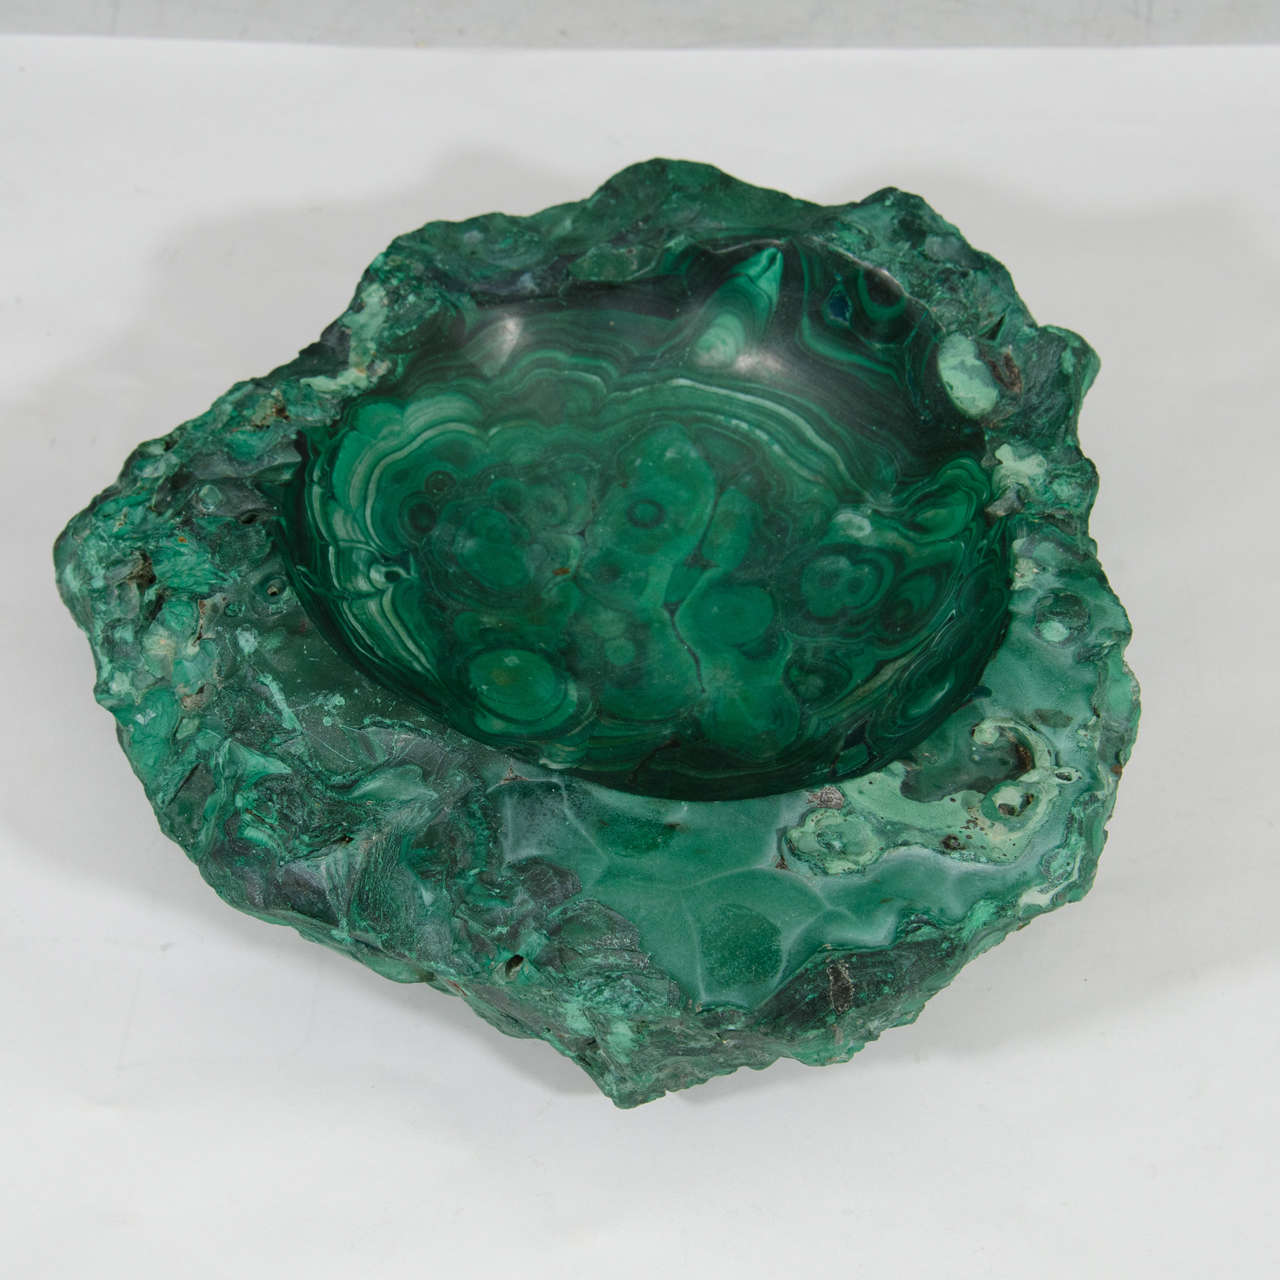 A vintage deep dish, ash tray, or bowl in malachite with green swirl detailing. Good vintage condition with age appropriate wear.